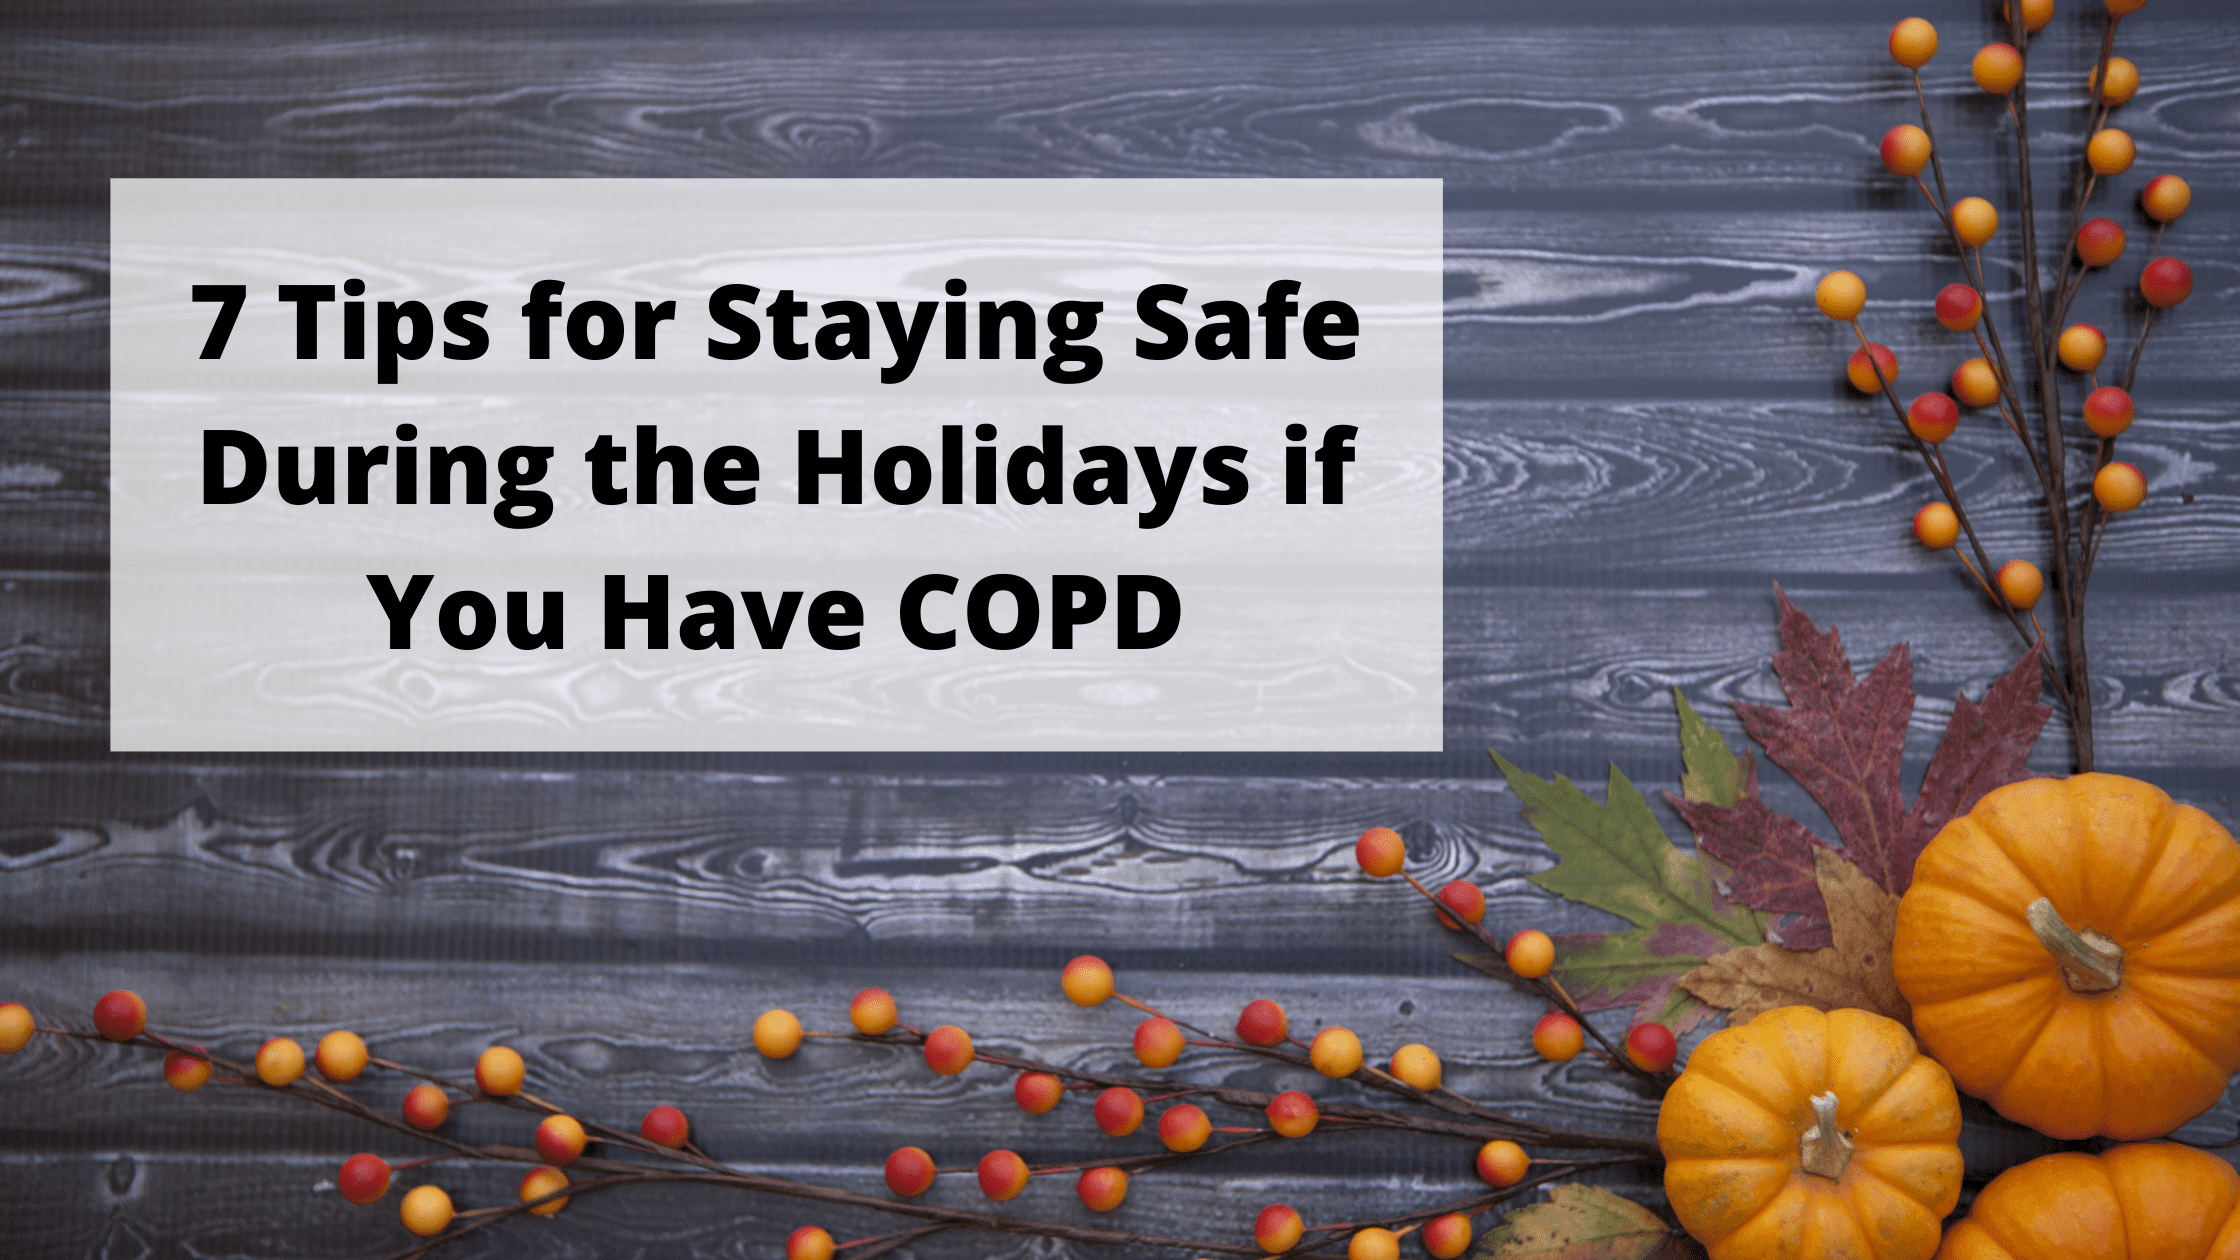 7 Tips for Staying Safe During the Holidays if You Have COPD